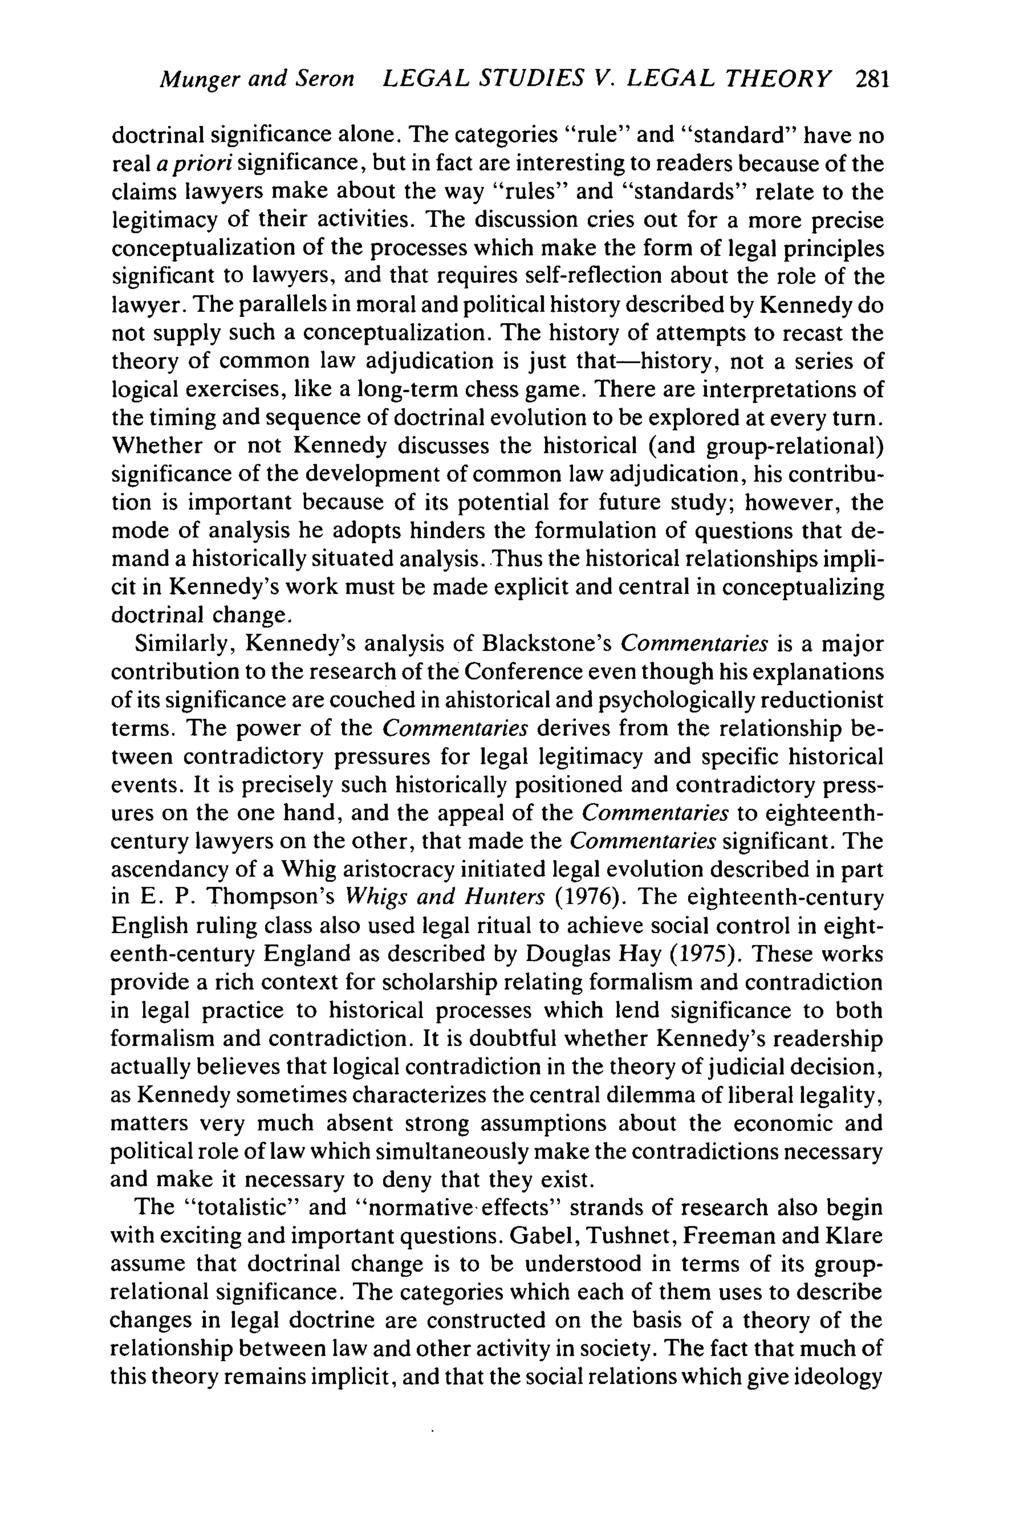 Munger and Seron LEGAL STUDIES V. LEGAL THEORY 281 doctrinal significance alone.